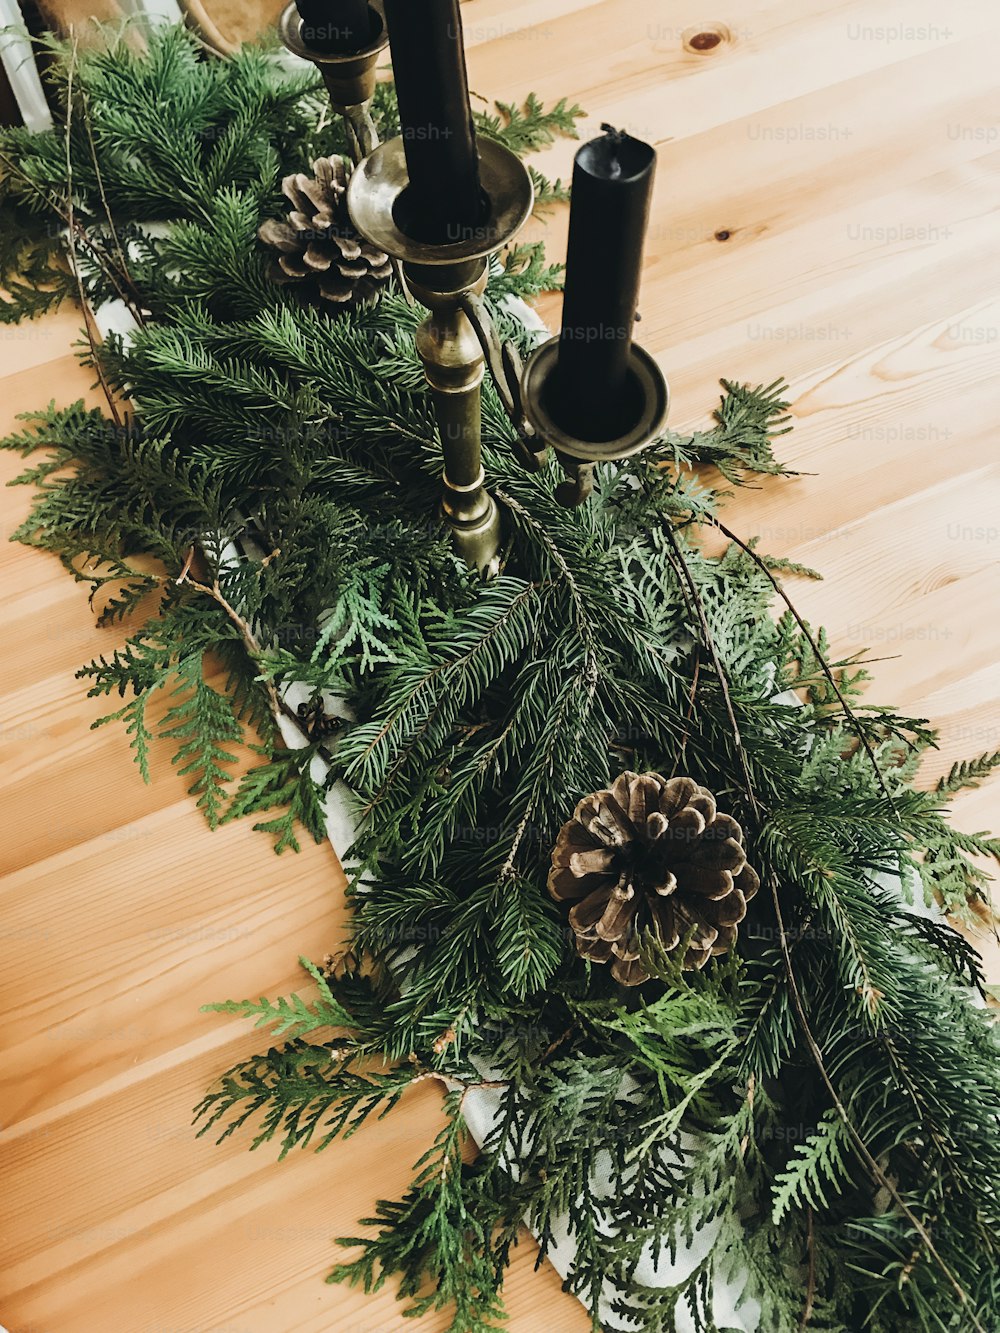 Christmas rustic decor of table. Vintage candlestick,pine branches with cones on wooden table, festive arrangement. Rural holiday decoration. Happy holidays. Phone photo